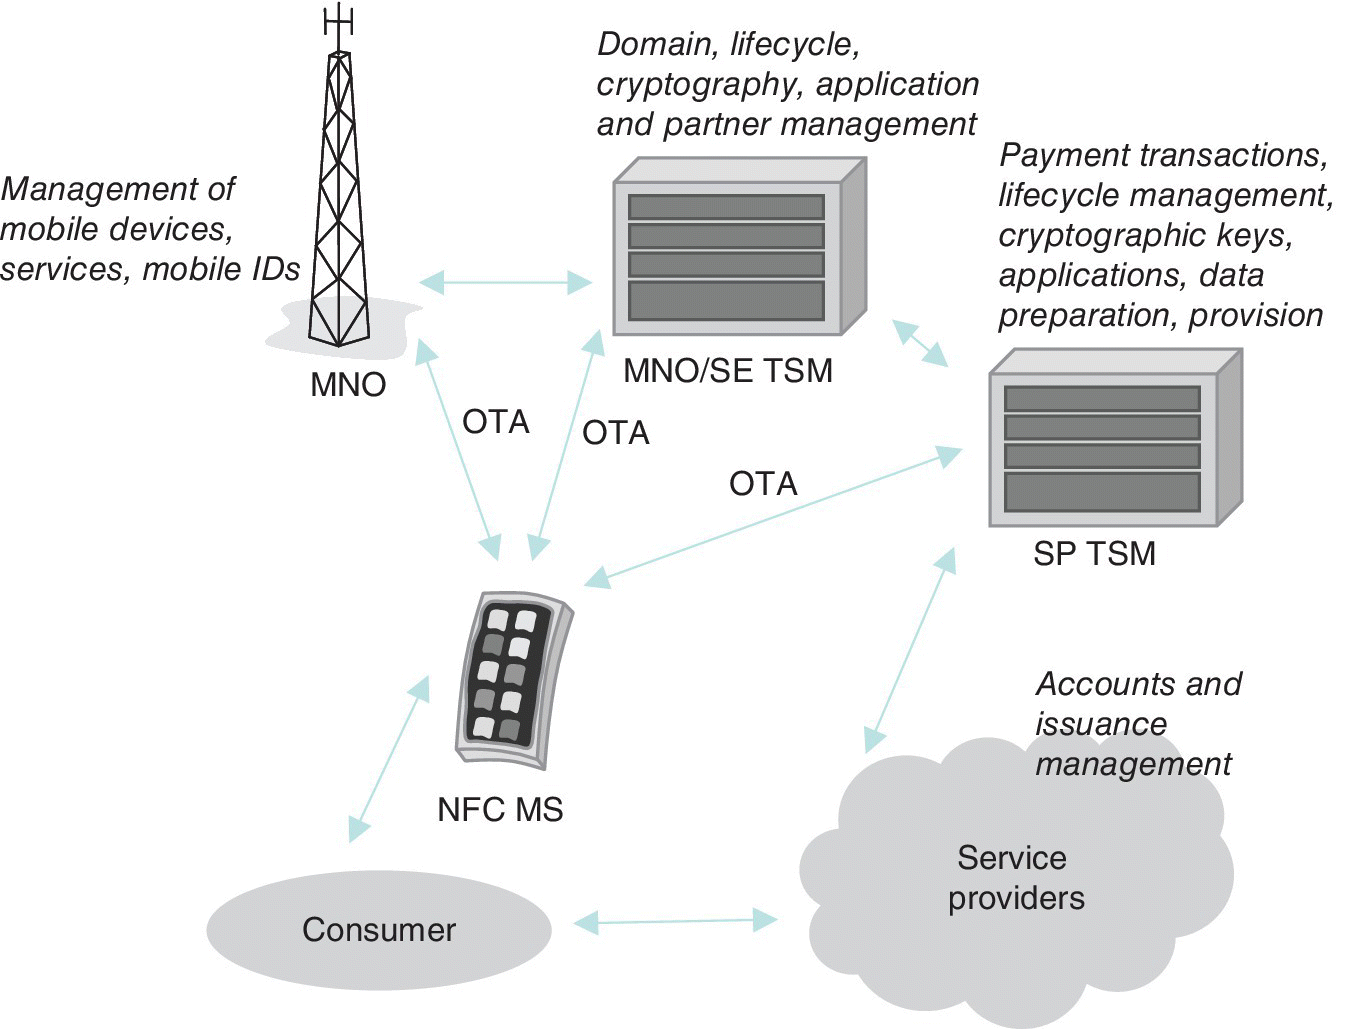 Schematic illustrating the principle of the TSM with the MNO, MNO/SE TSM, SP TSM, service providers, consumer, and NFC MS being connected by two-headed arrows.